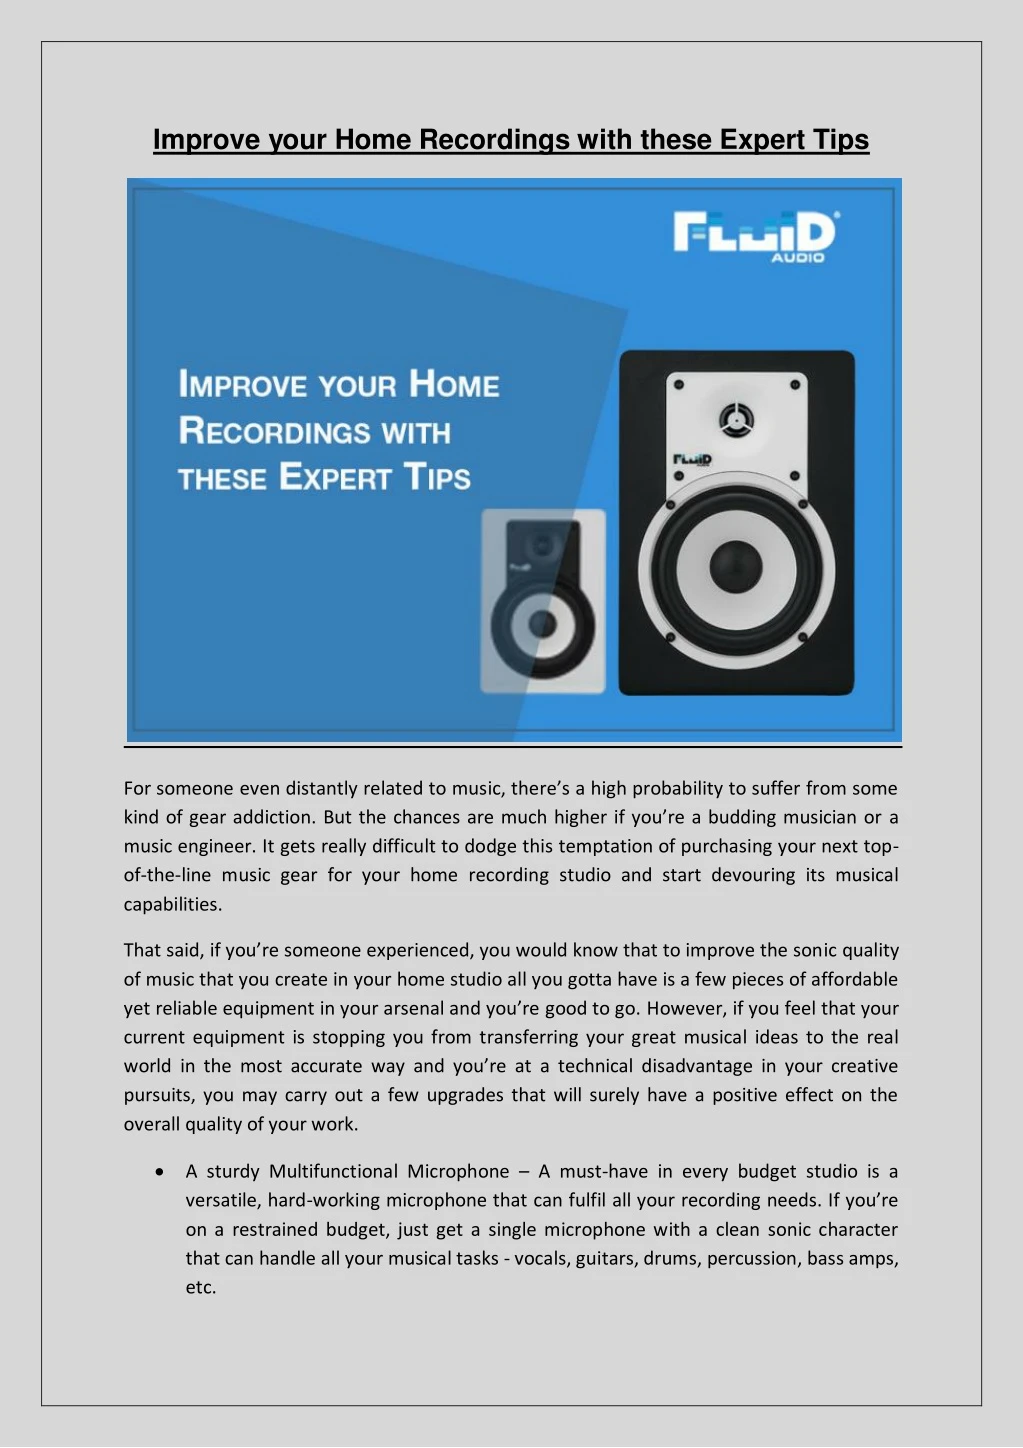 improve your home recordings with these expert